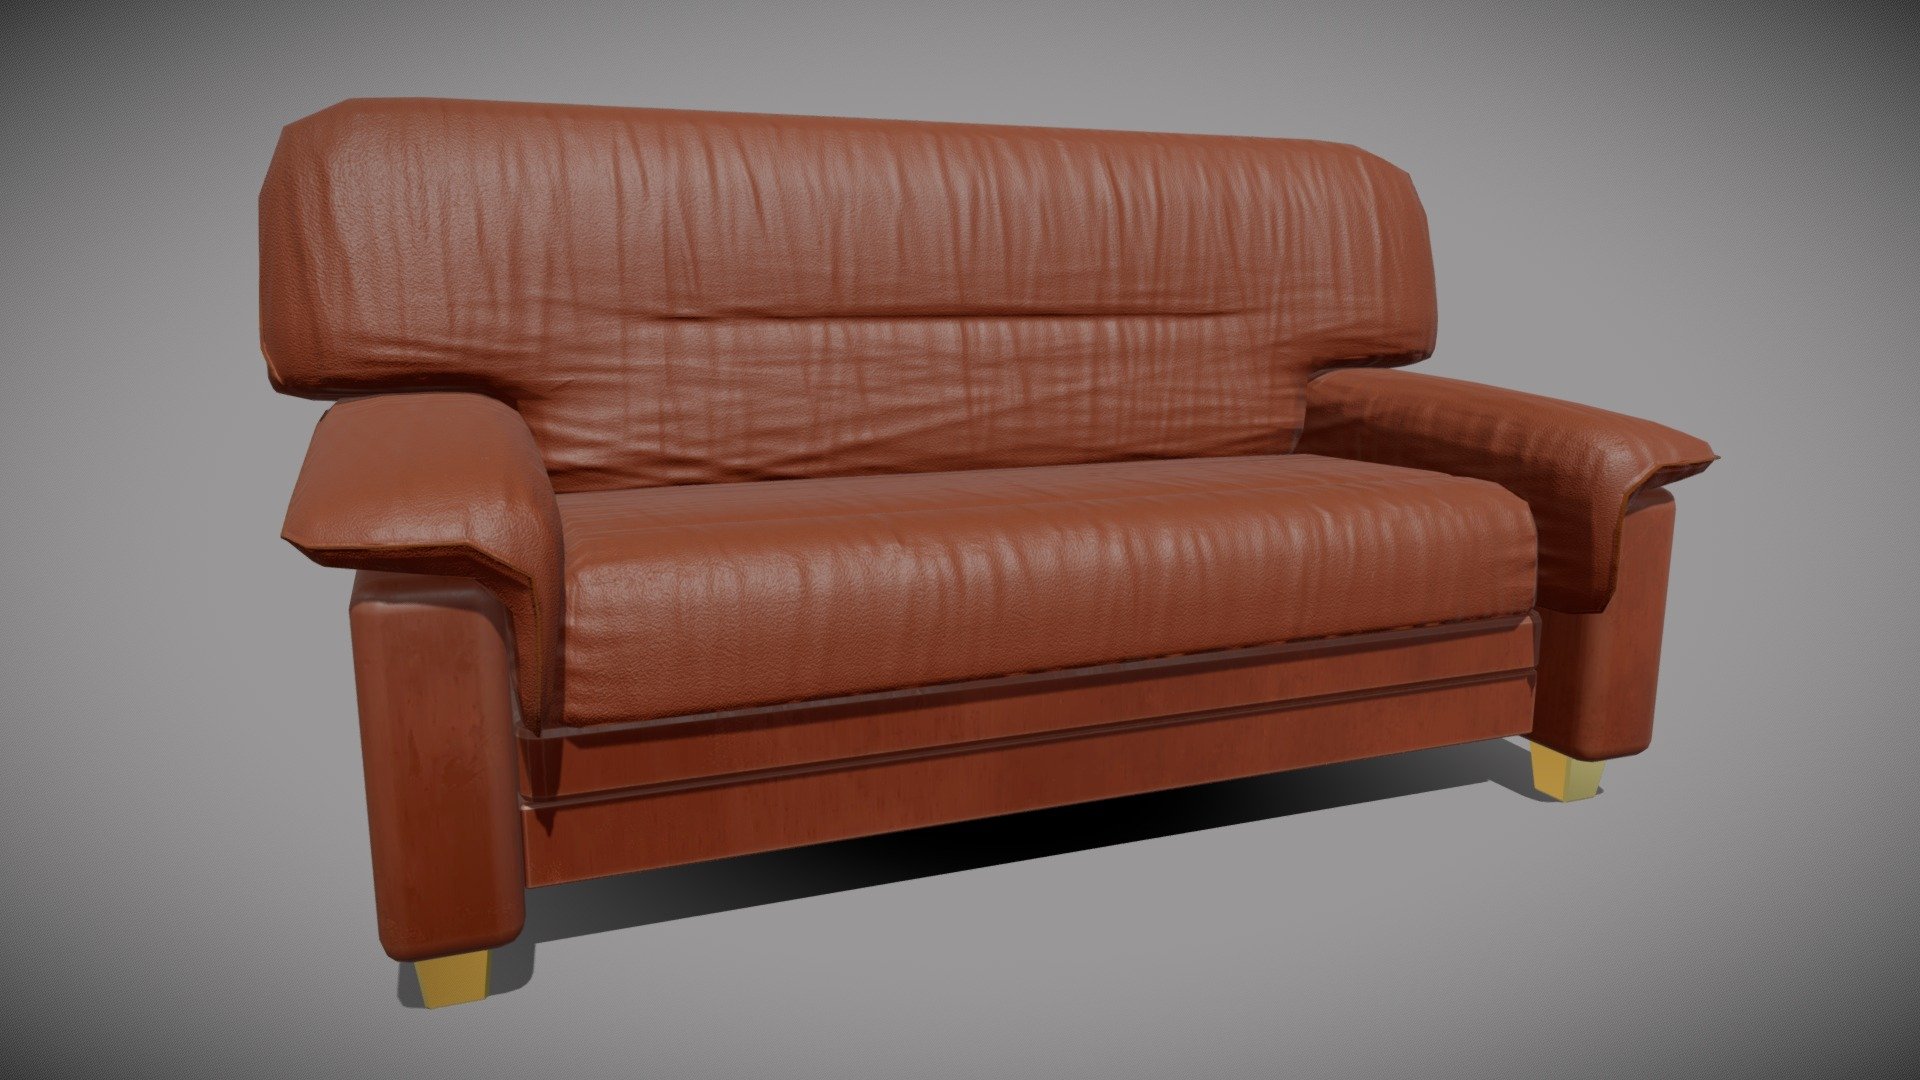 A little soft leather sofa/couch 3d model